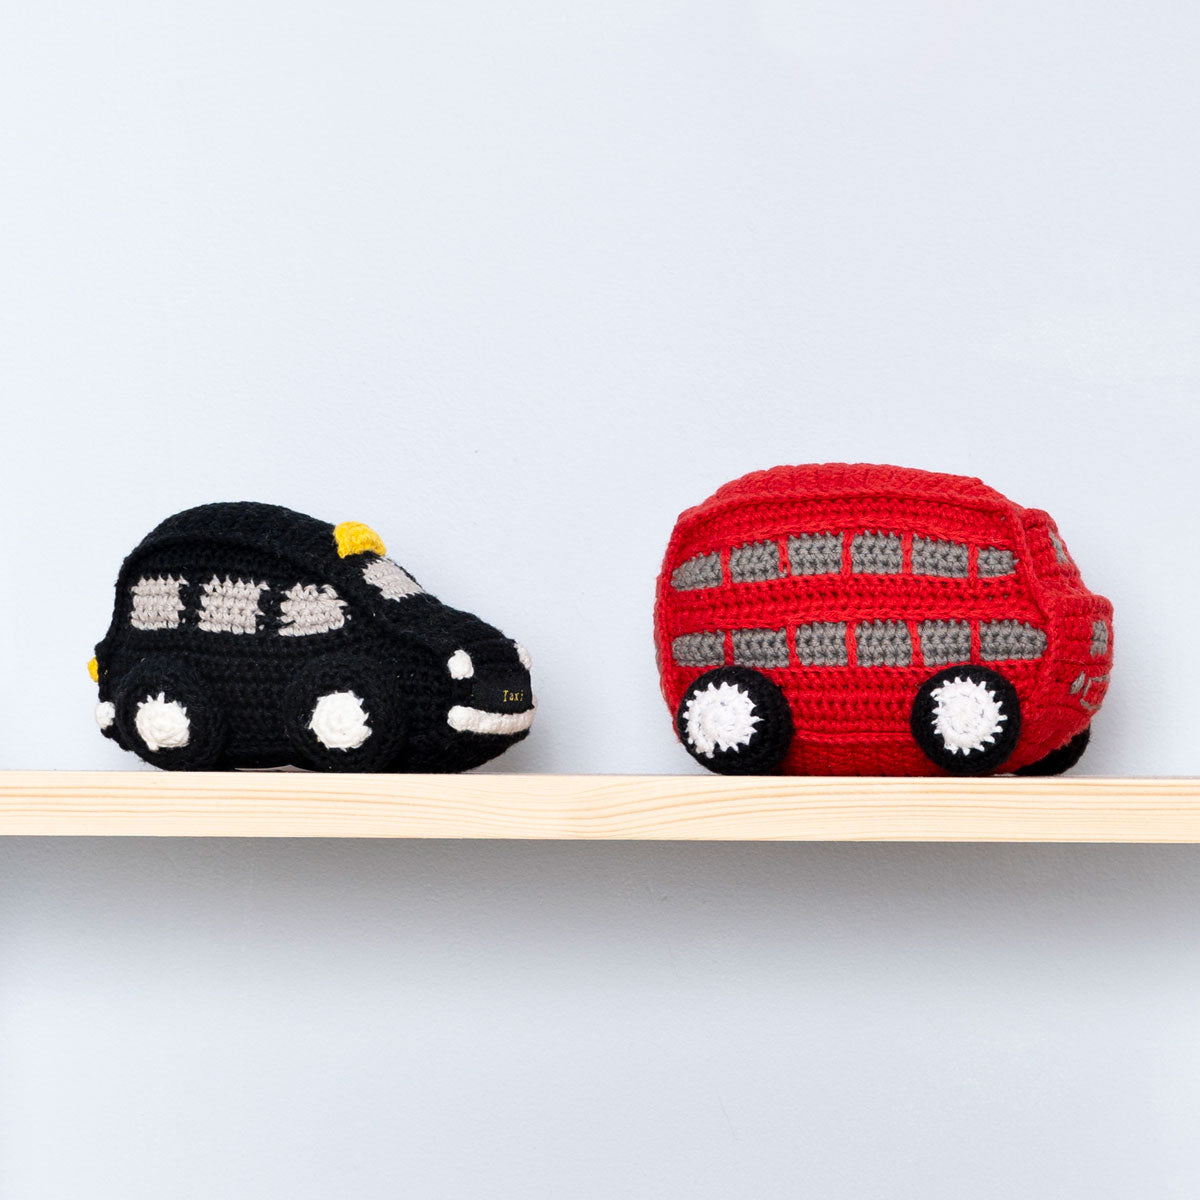 Double Decker Bus Crochet Baby Toy With Rattle lifestyle